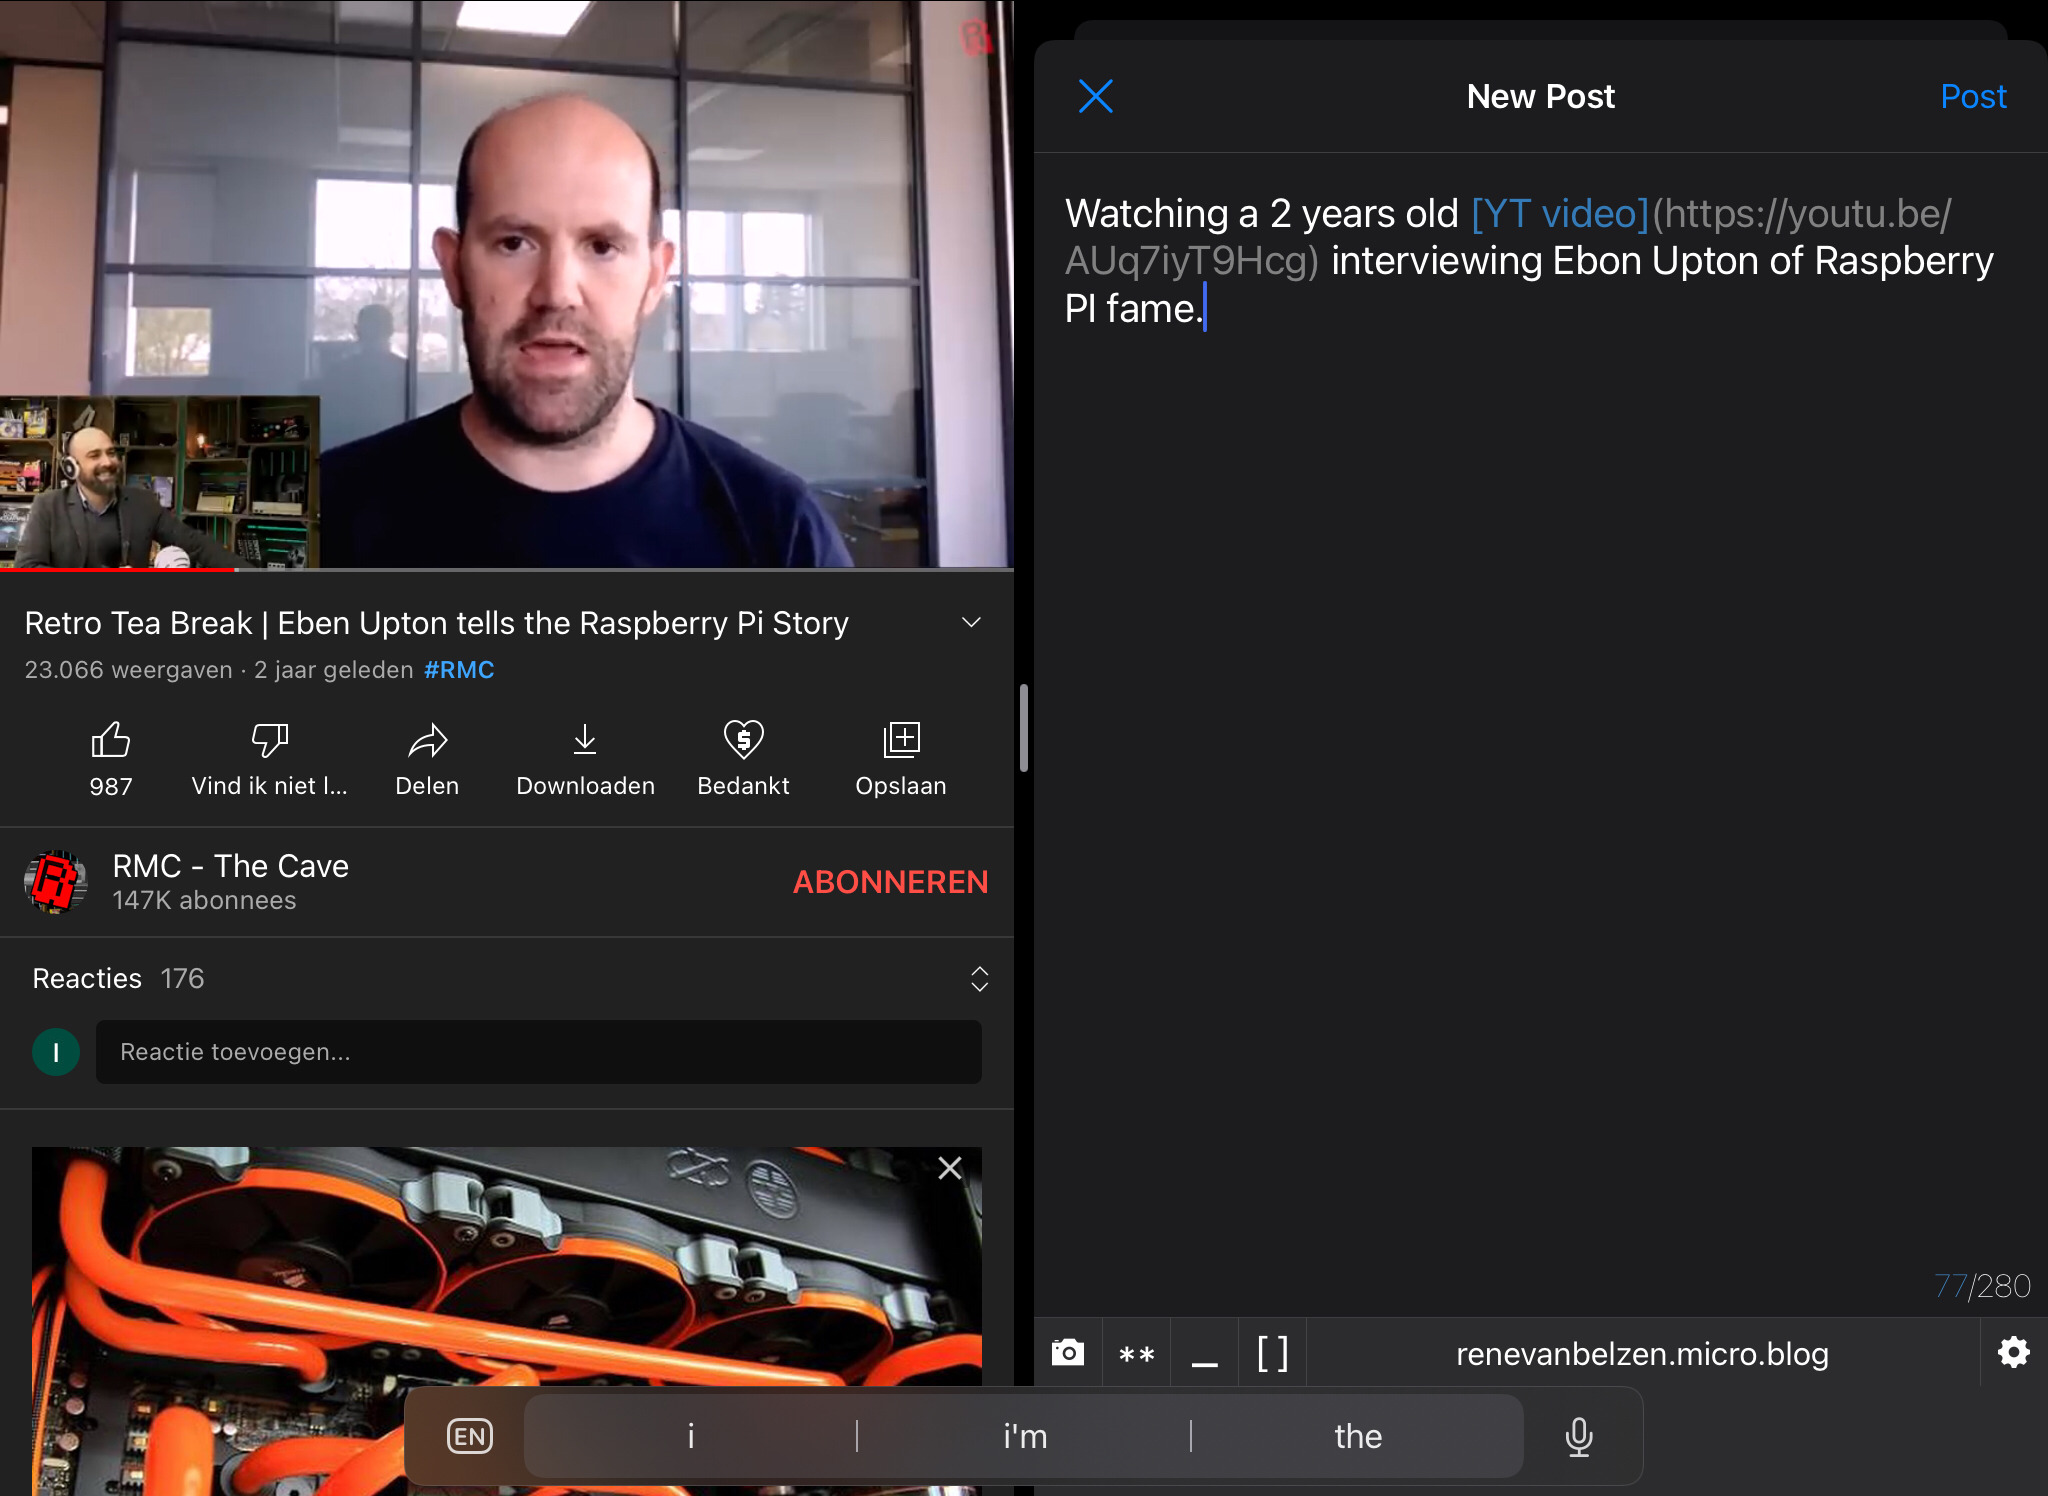 iPad screenshot with YouTube video on the left and micro∙blog New Post at the left